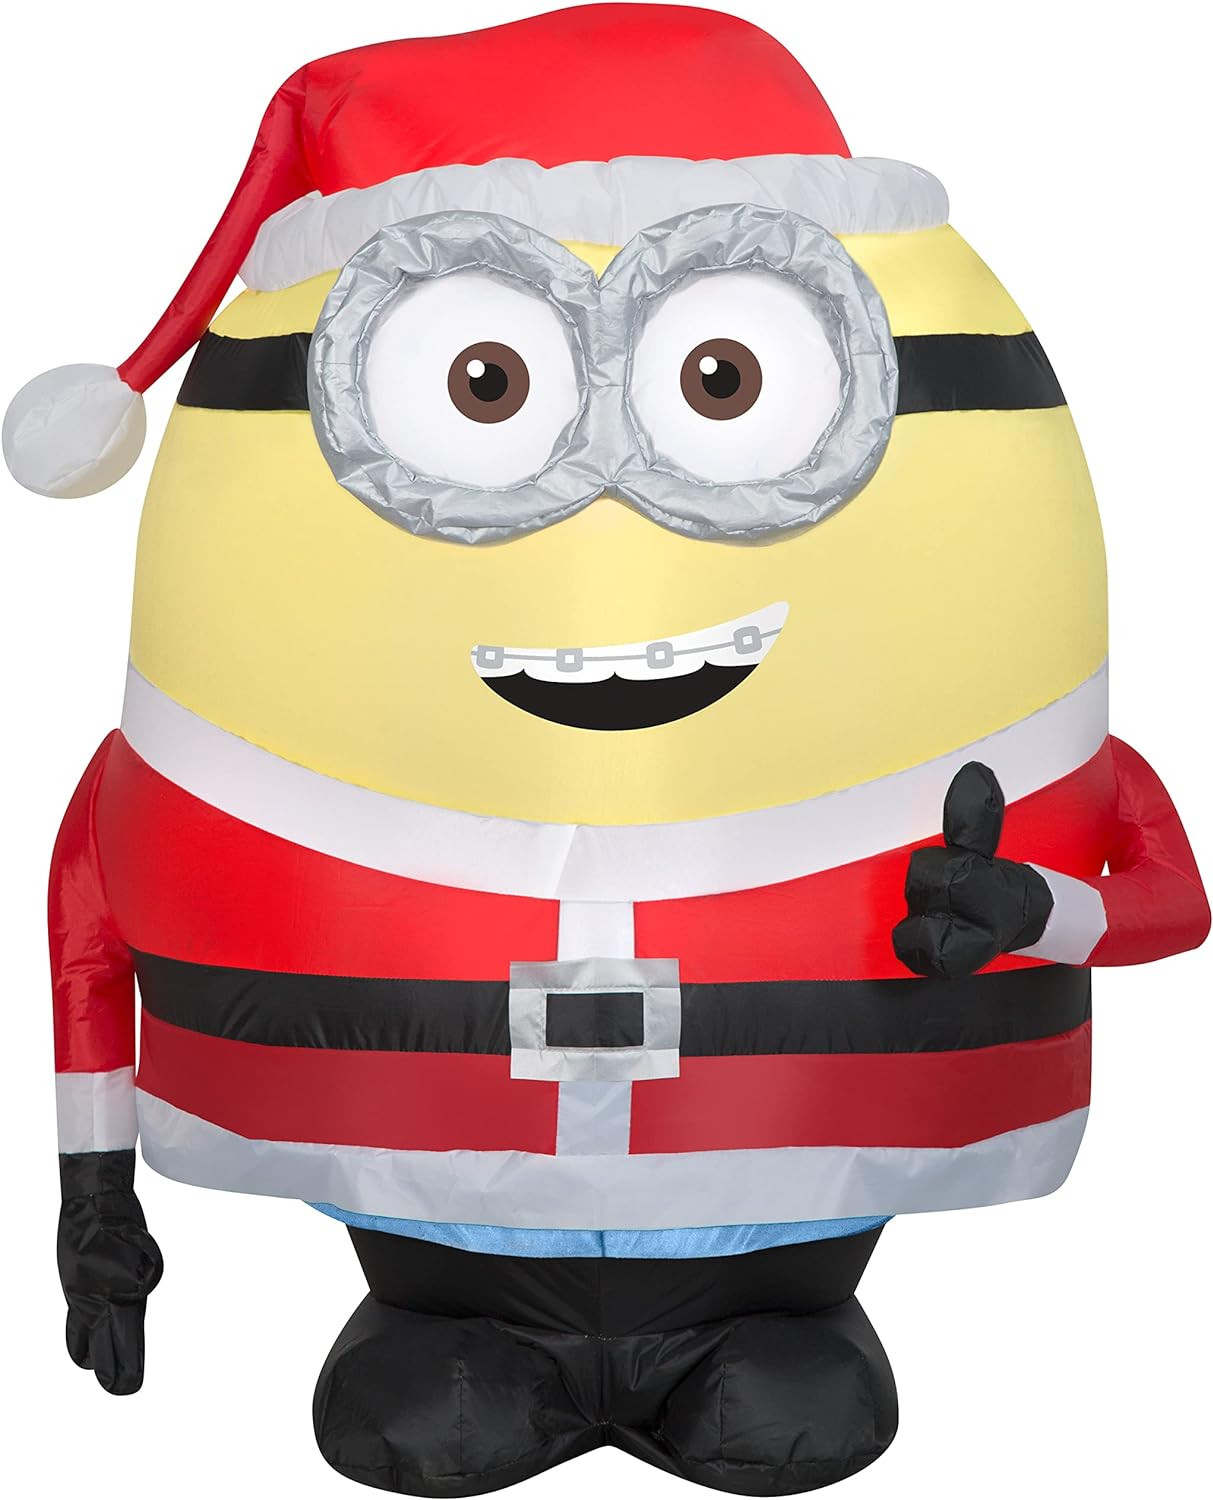 3 Ft Airblown Inflatable Minion Otto in Santa Suit